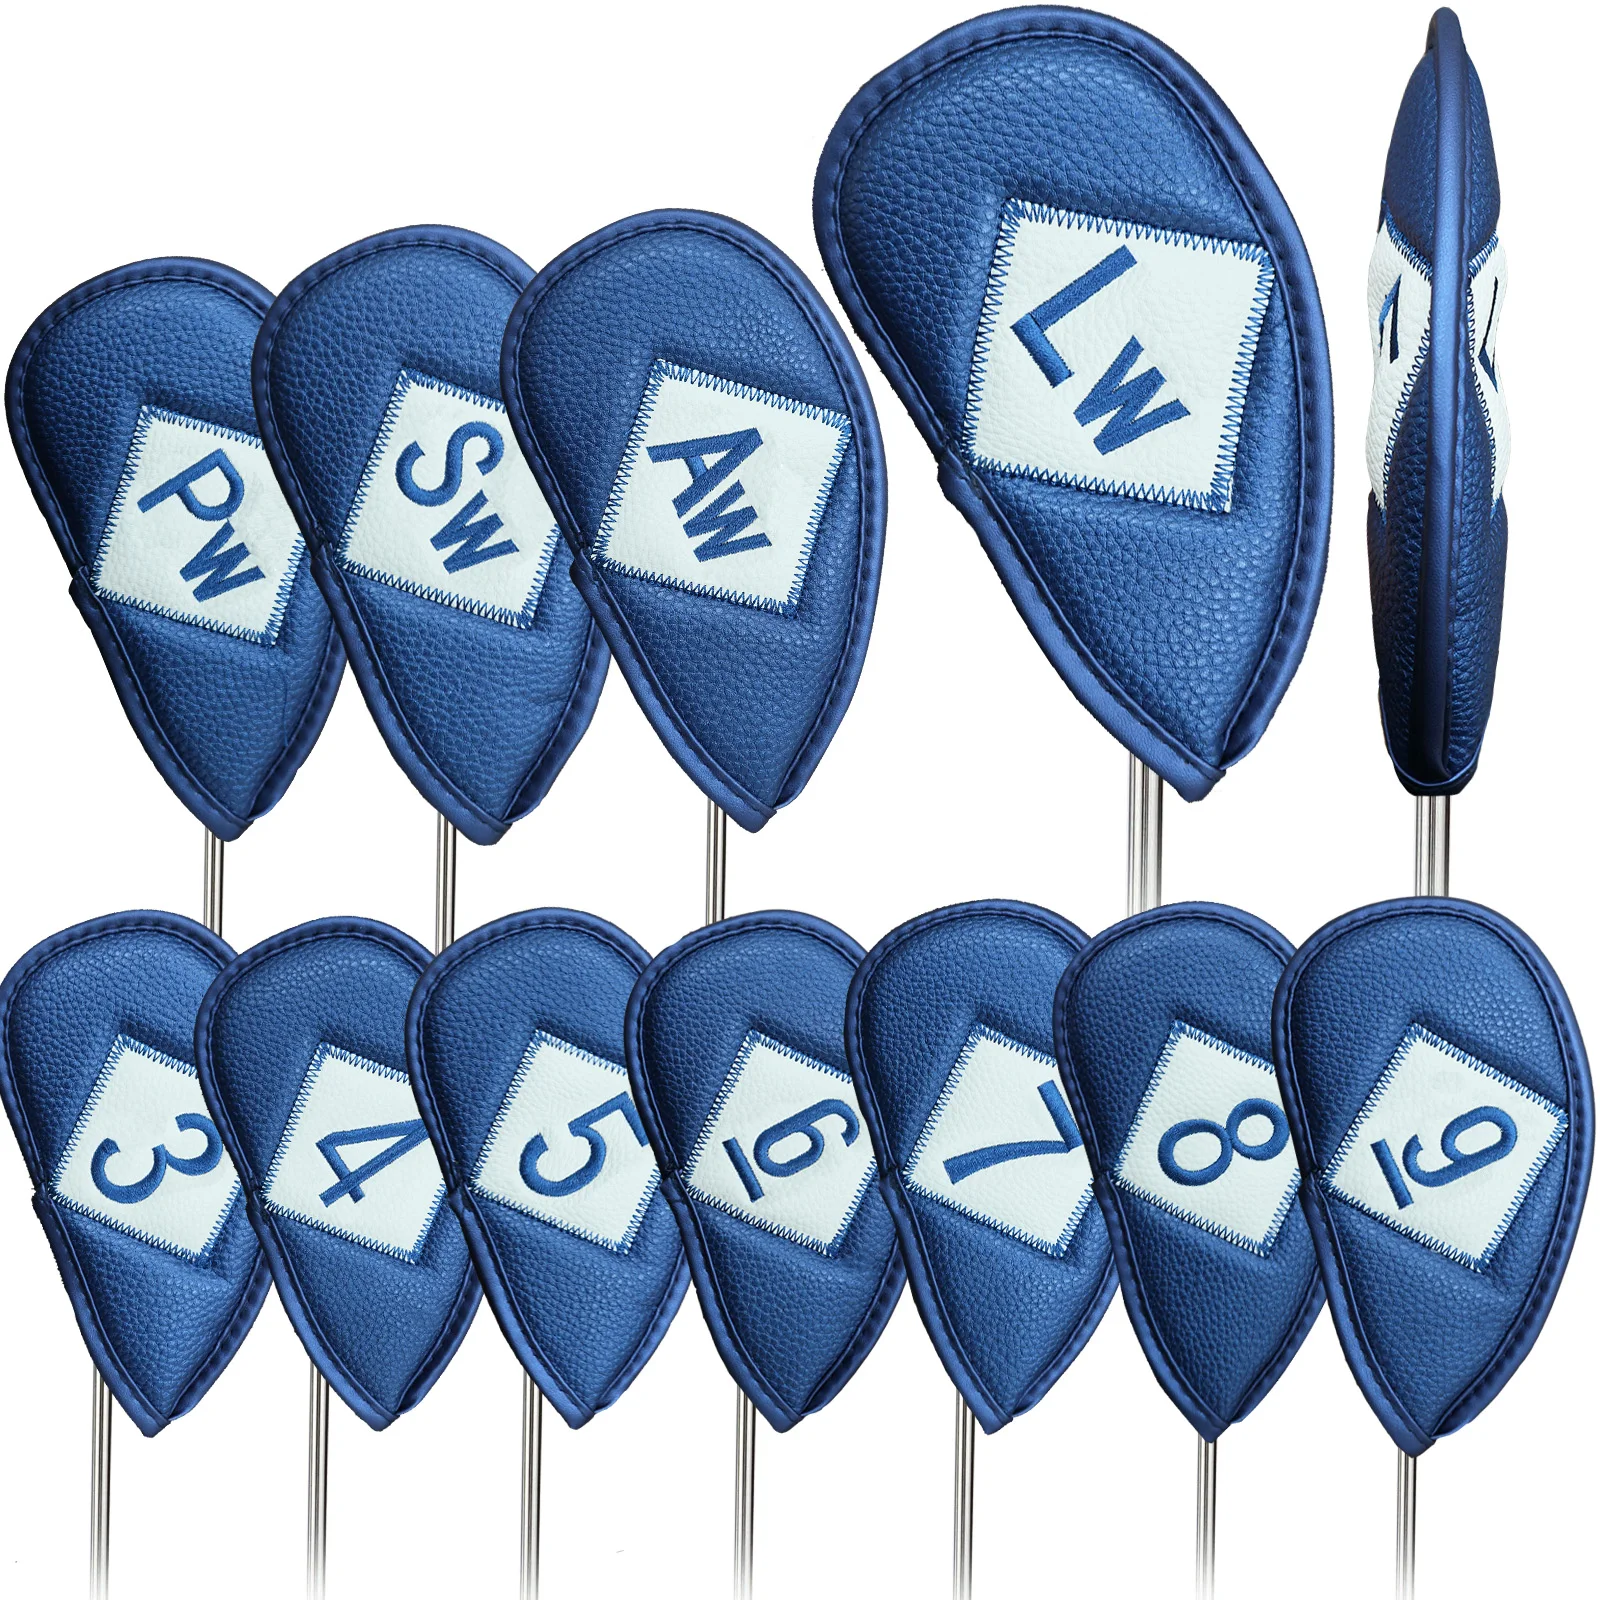 12 Pcs Deluxe Synthetic Leather Golf Iron Head Covers Club Headcover Waterproof for All Irons Club DripShipping